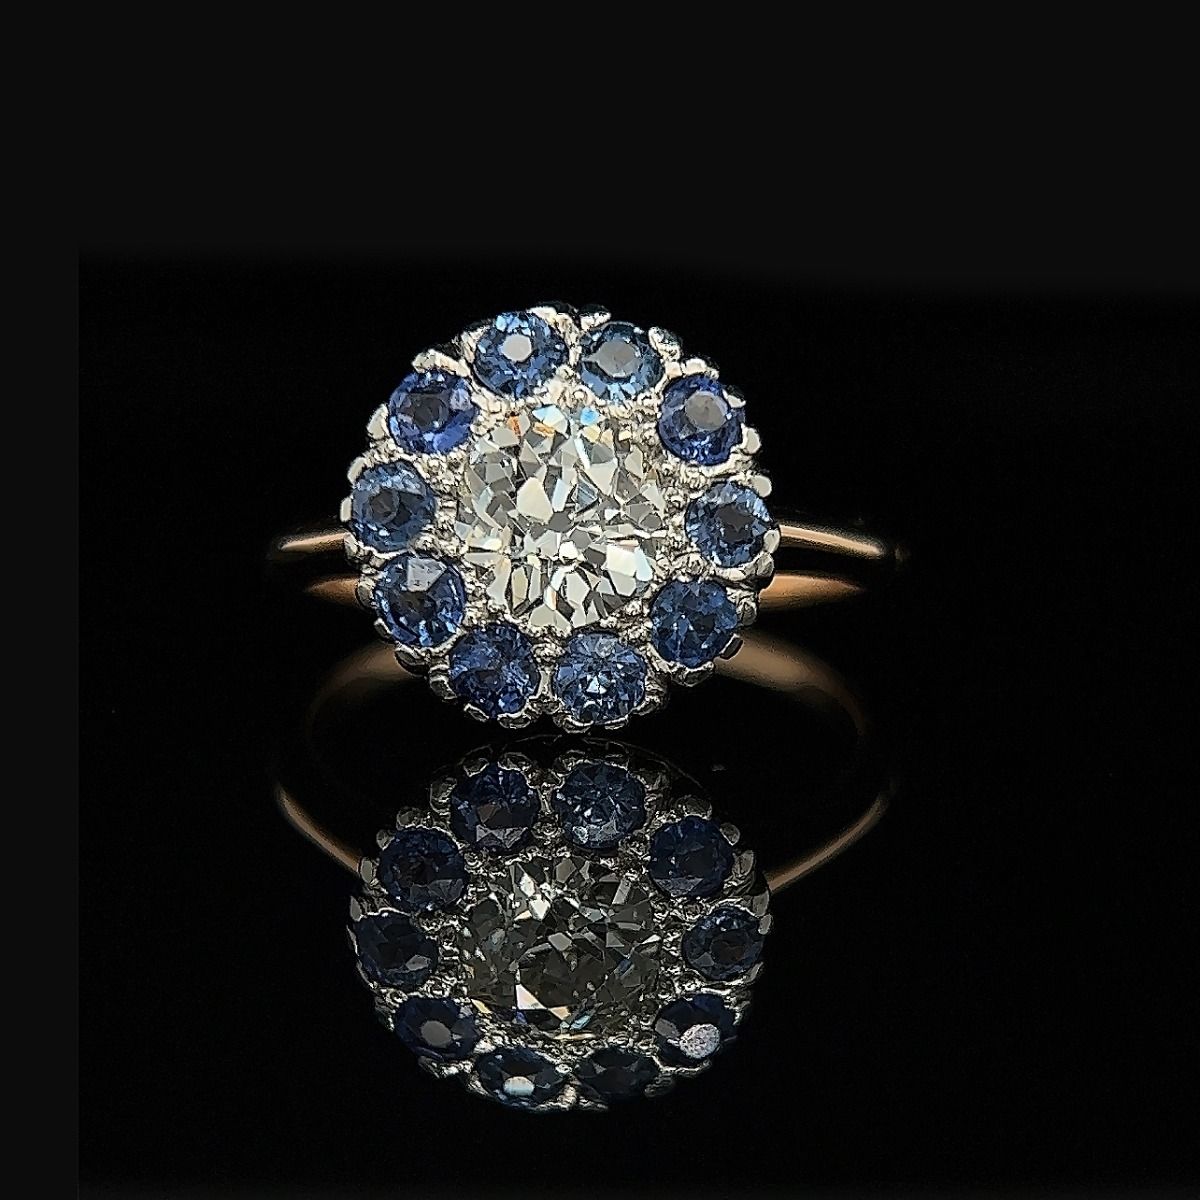 BEST PLACE TO BUY ANTIQUE/VINTAGE ENGAGEMENT RINGS